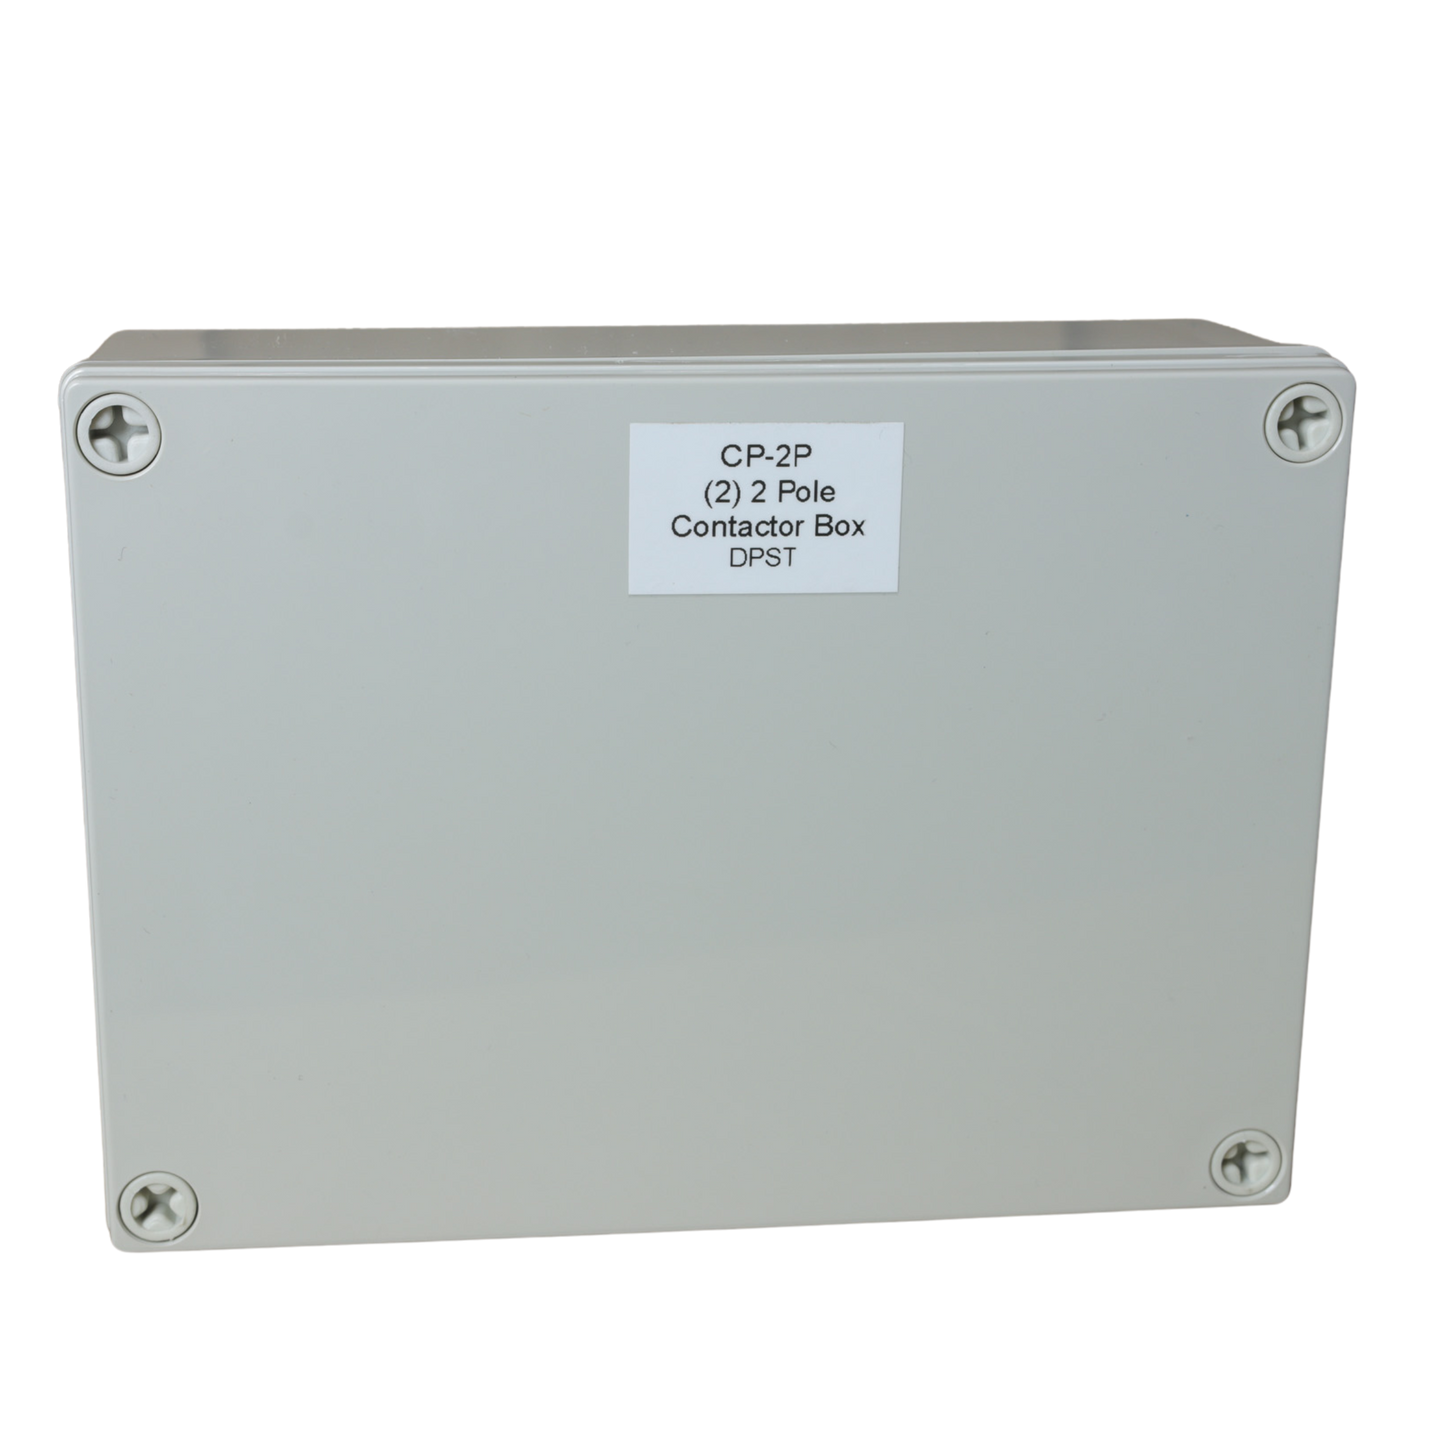 Contactor Panel - Double Pole - For 120v or 240v loads